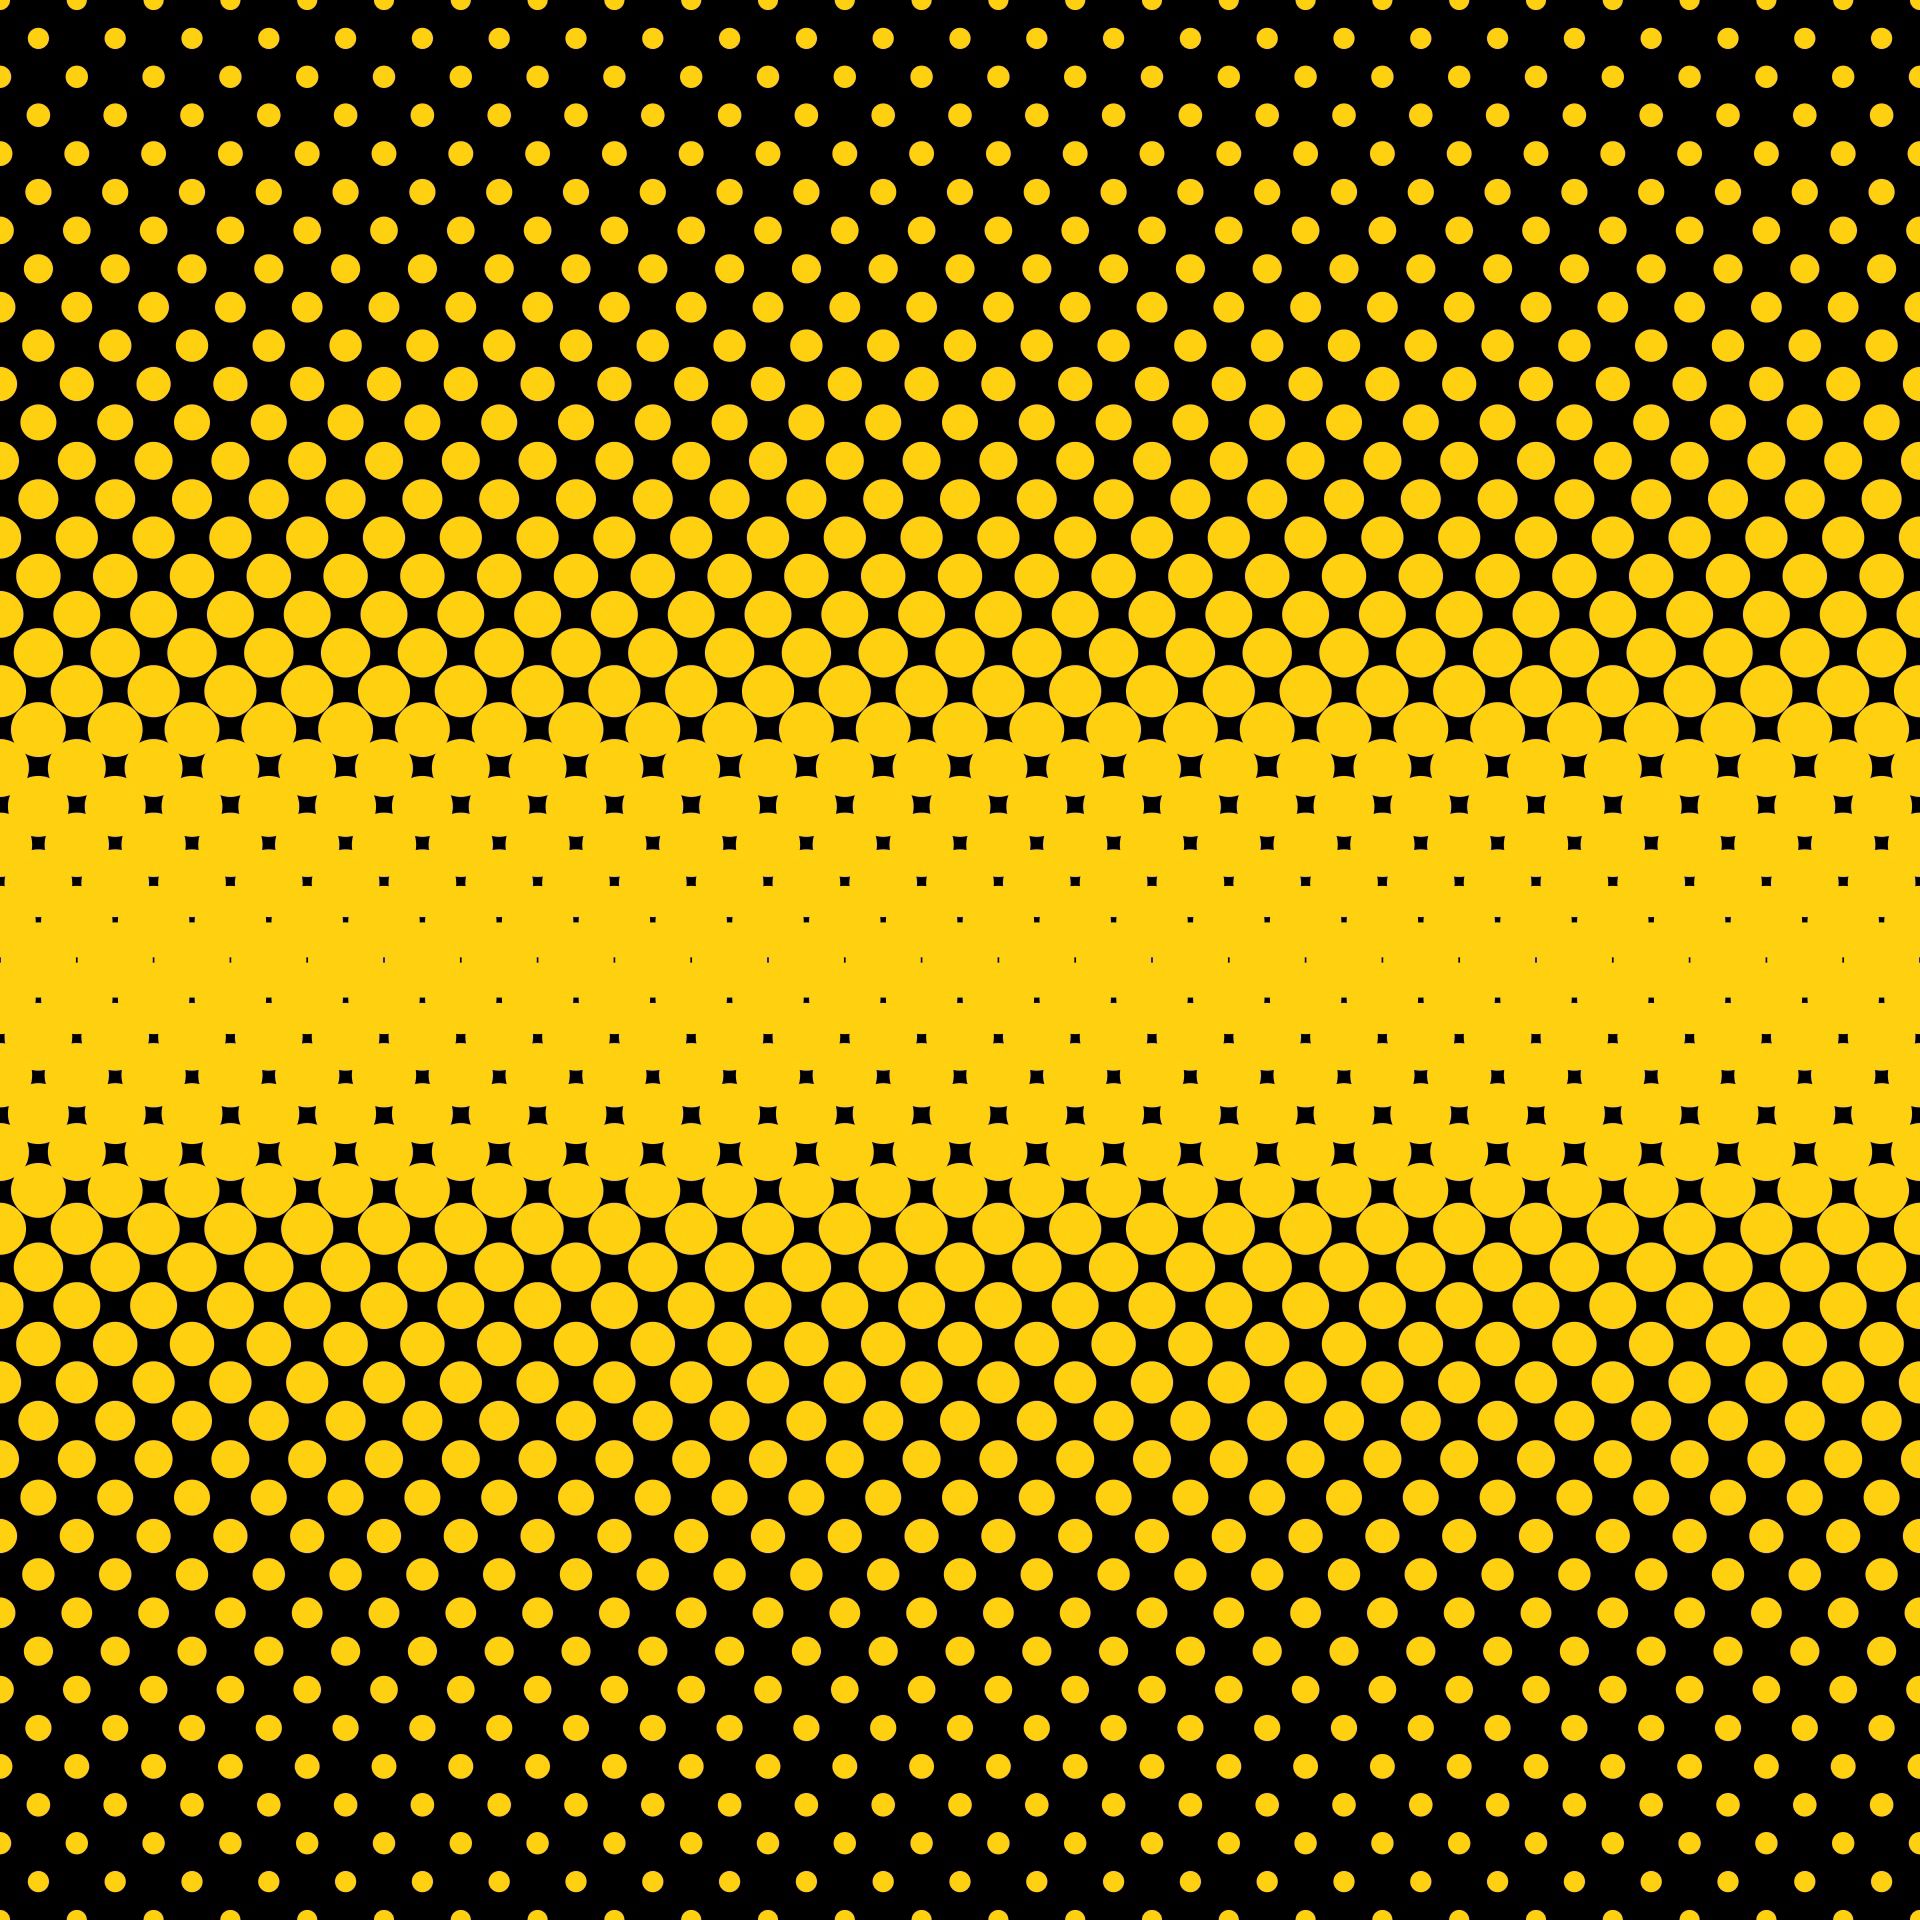 semitone, point, textures, texture, yellow, black, circles, points cell phone wallpapers